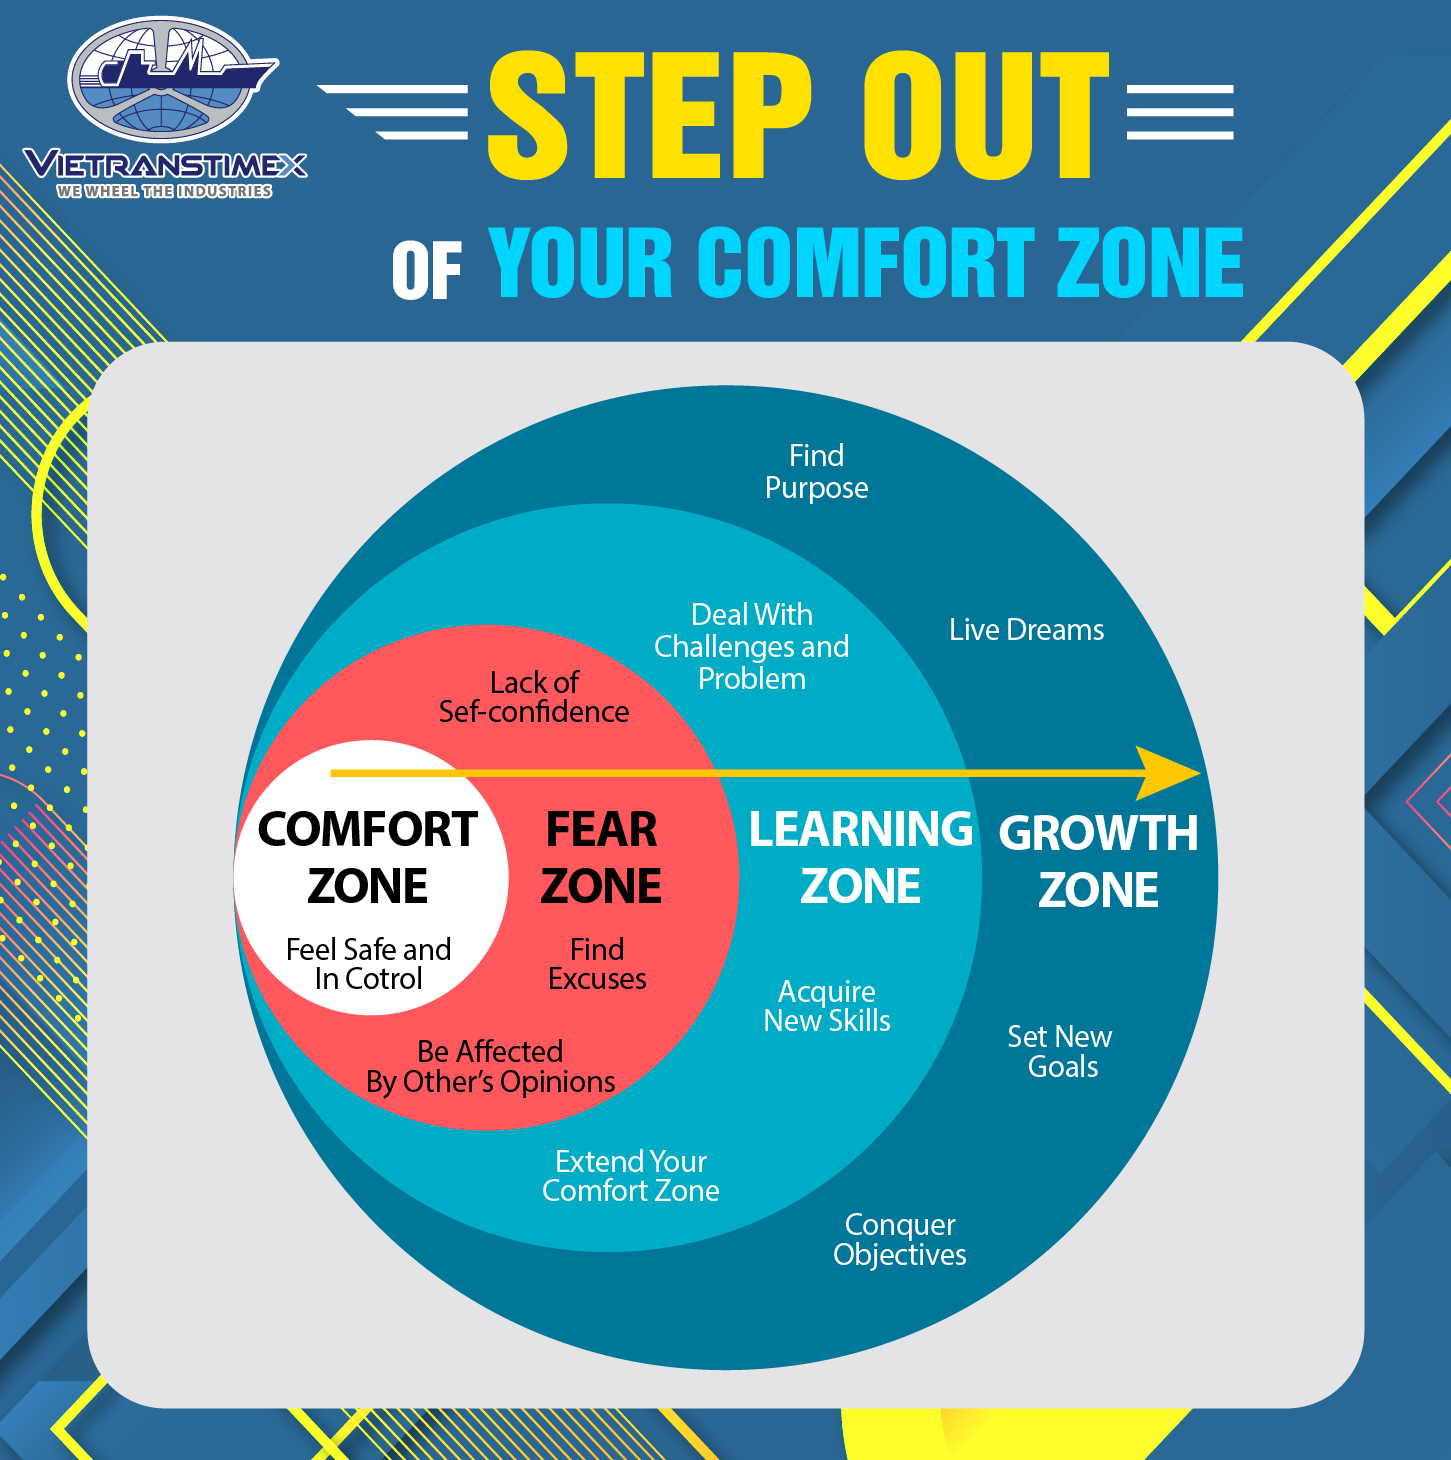 Step Out Of Your Comfort Zone - Vietranstimex